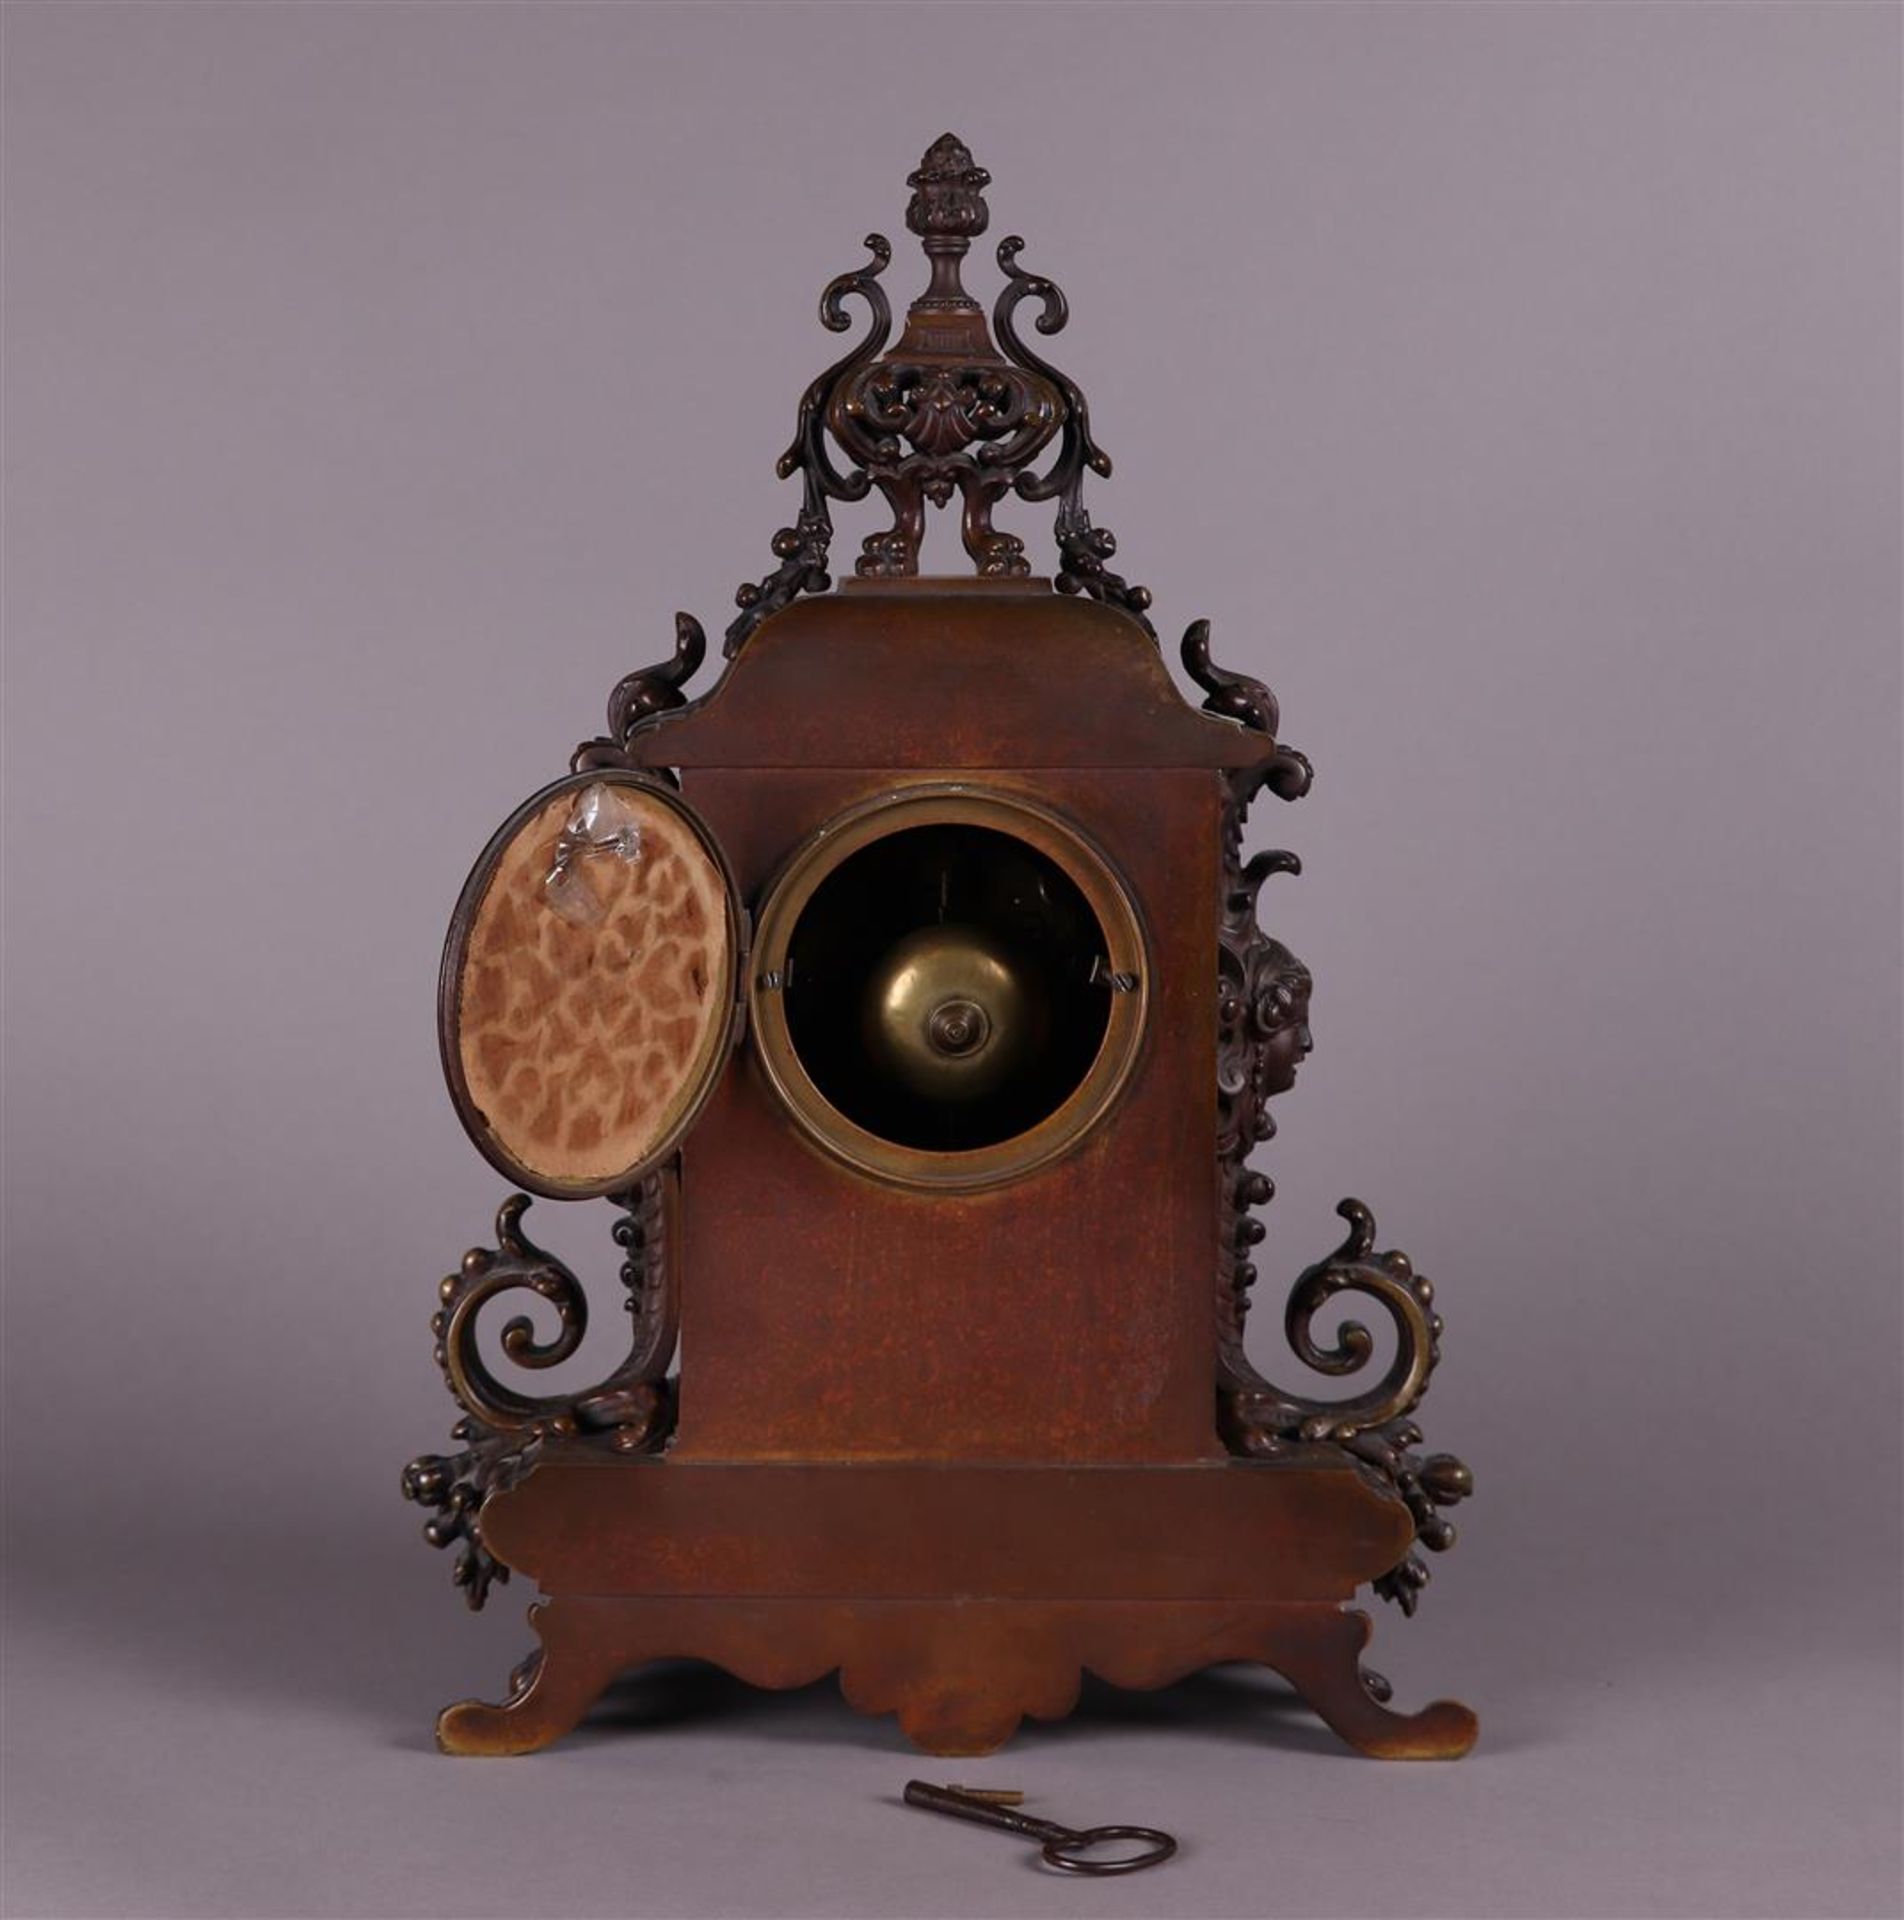 A heavy bronze mantel clock with matching key, ca. 1880. - Image 5 of 5